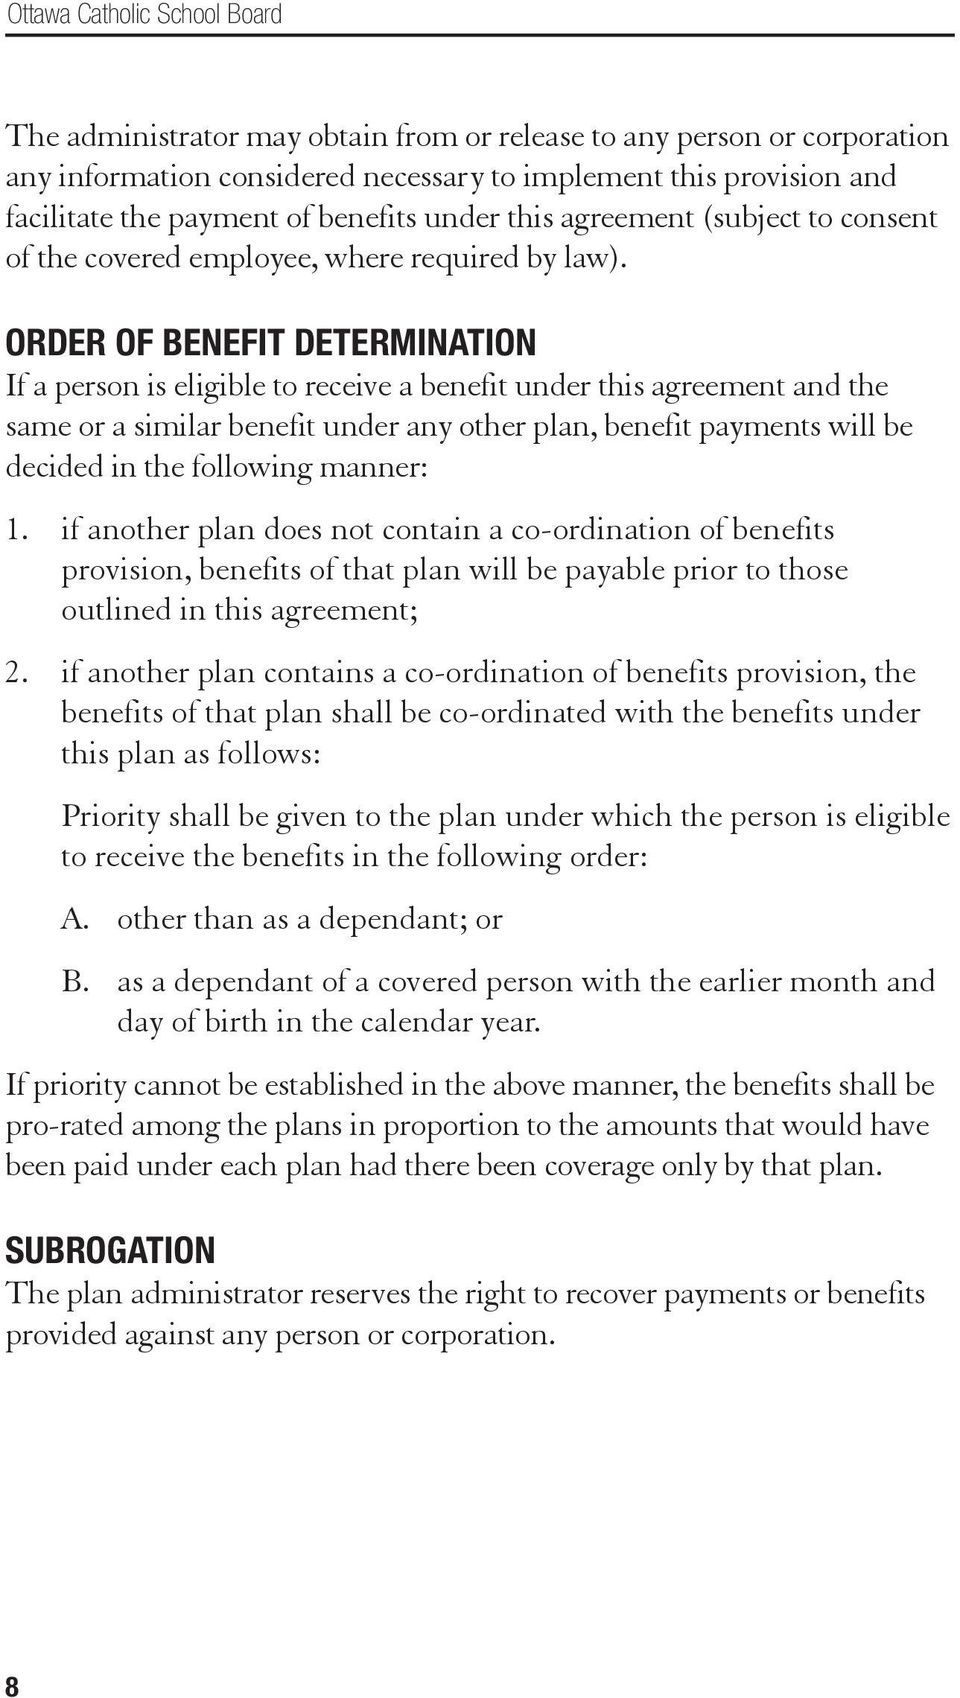 ORDER OF BENEFIT DETERMINATION If a person is eligible to receive a benefit under this agreement and the same or a similar benefit under any other plan, benefit payments will be decided in the